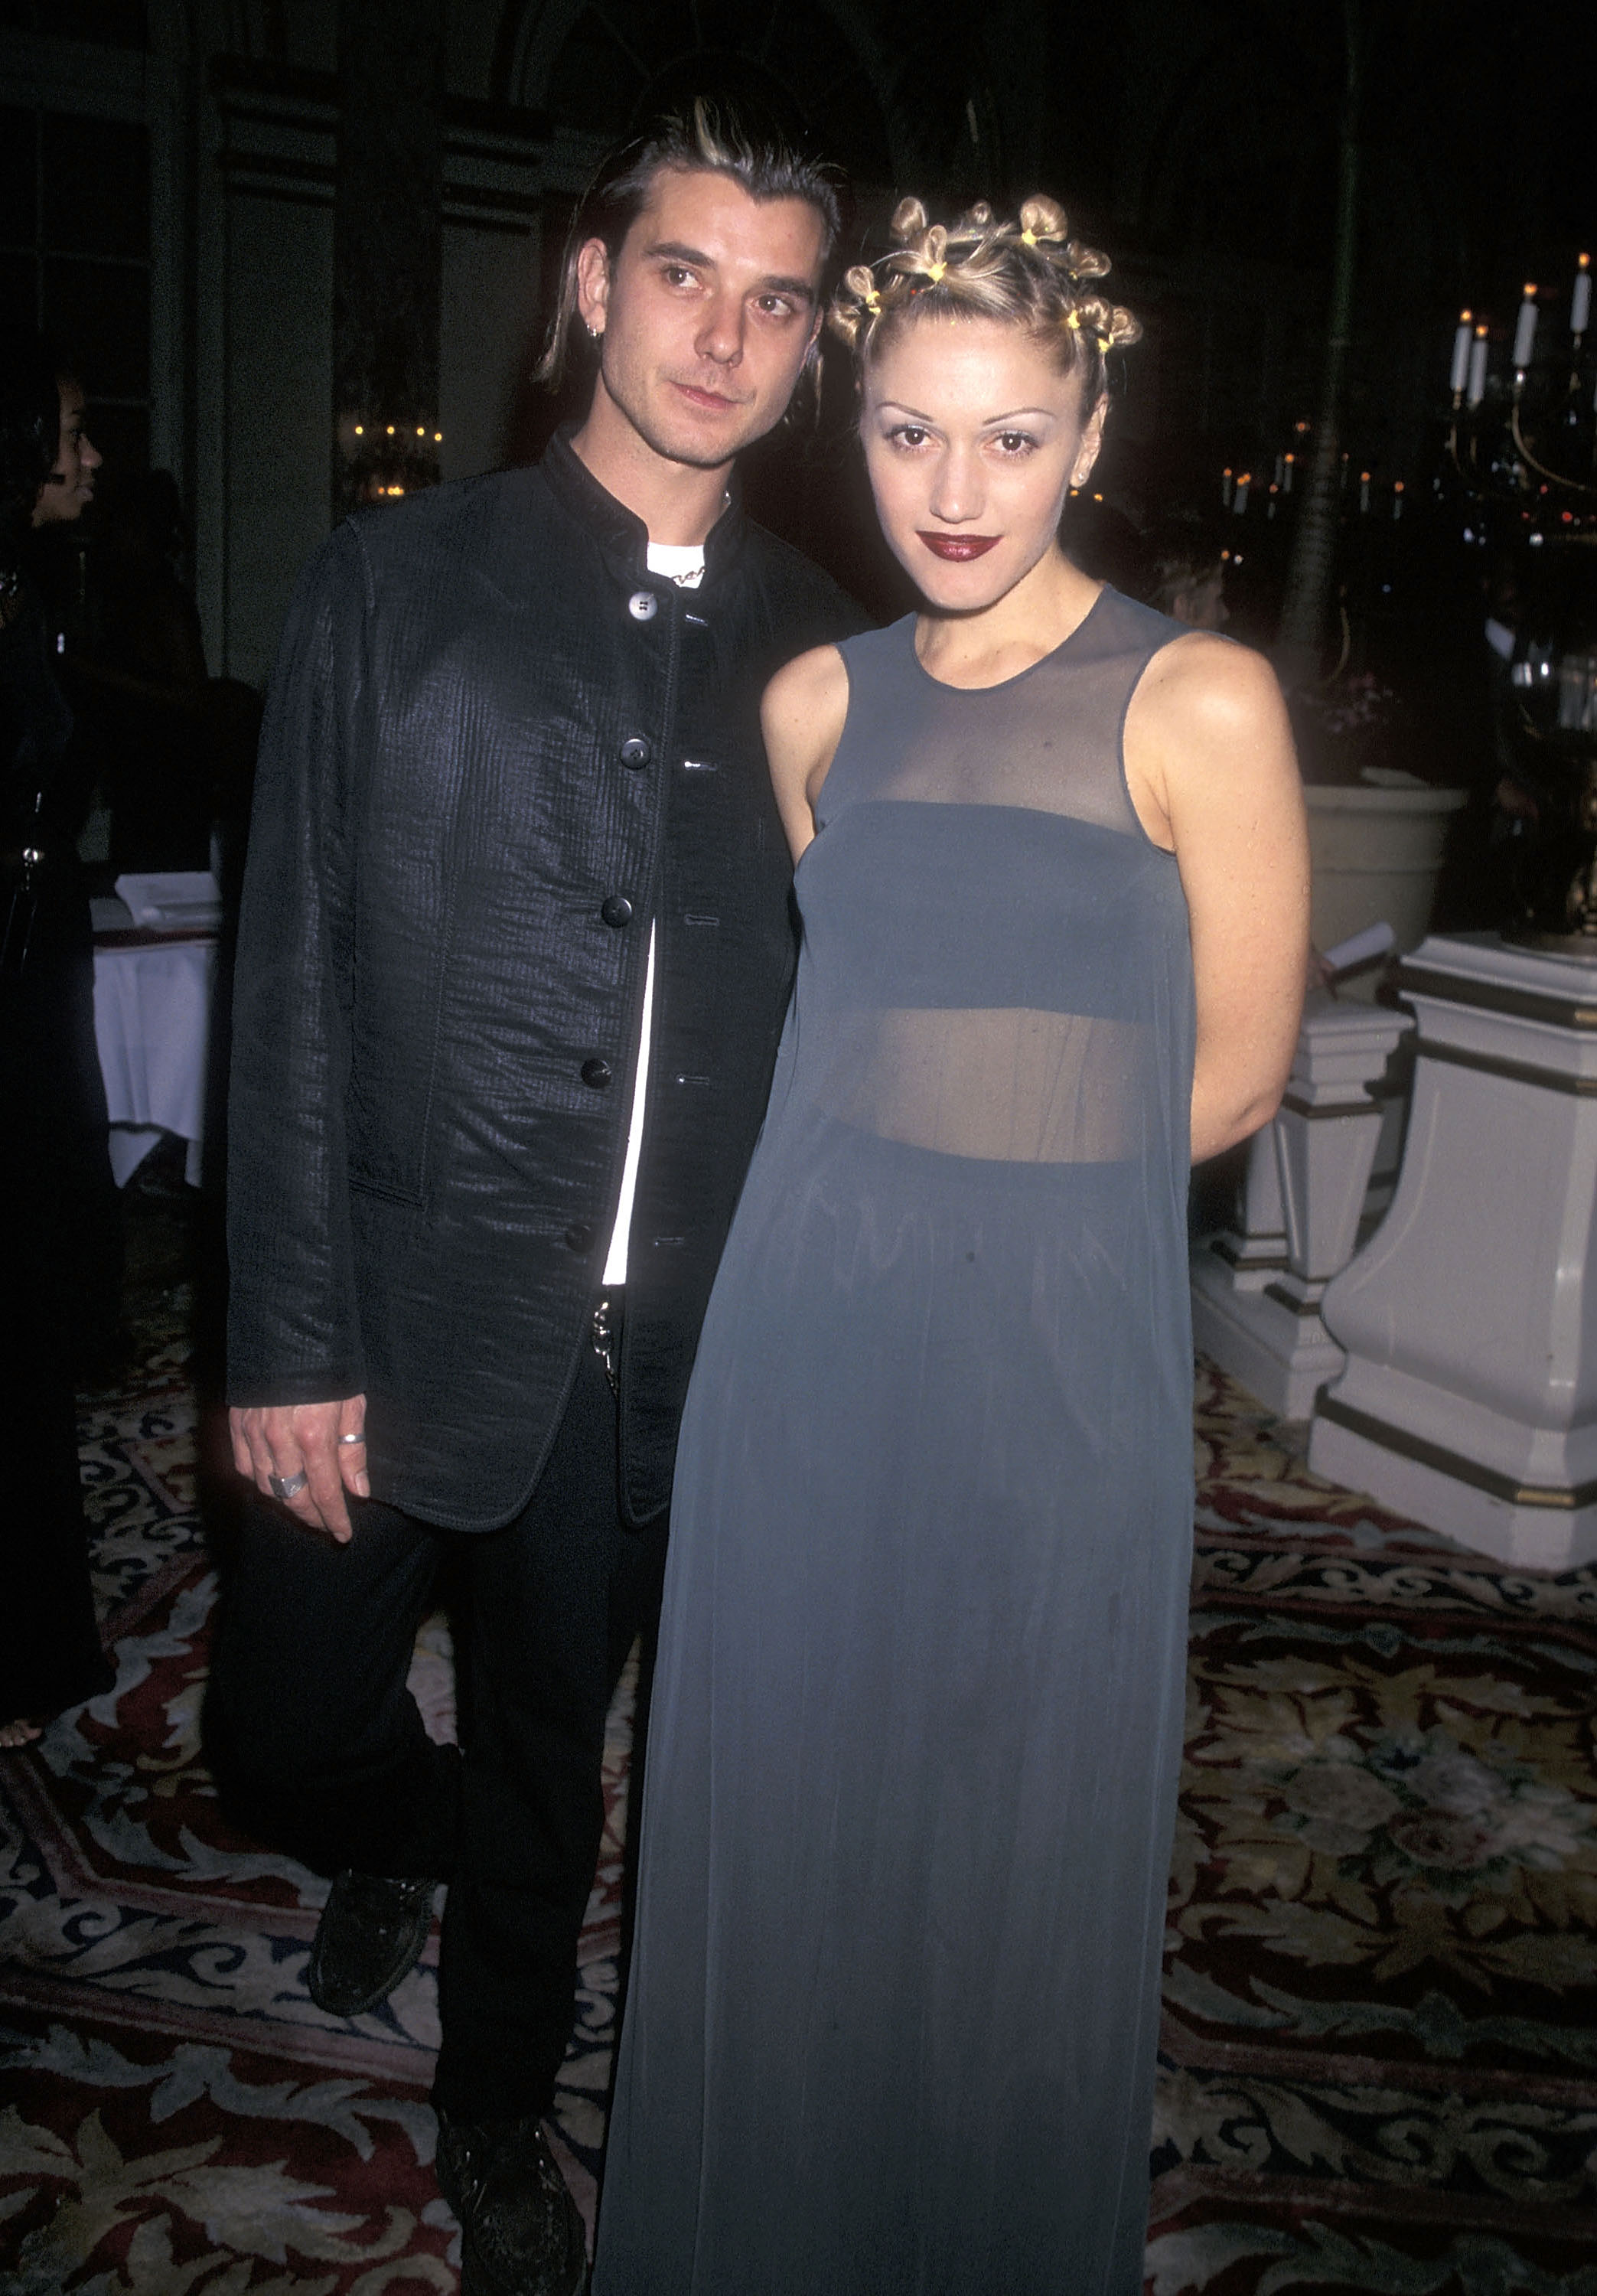 Gavin Rossdale and Gwen attend the 40th Annual Grammy Awards Pre-Party in 1998